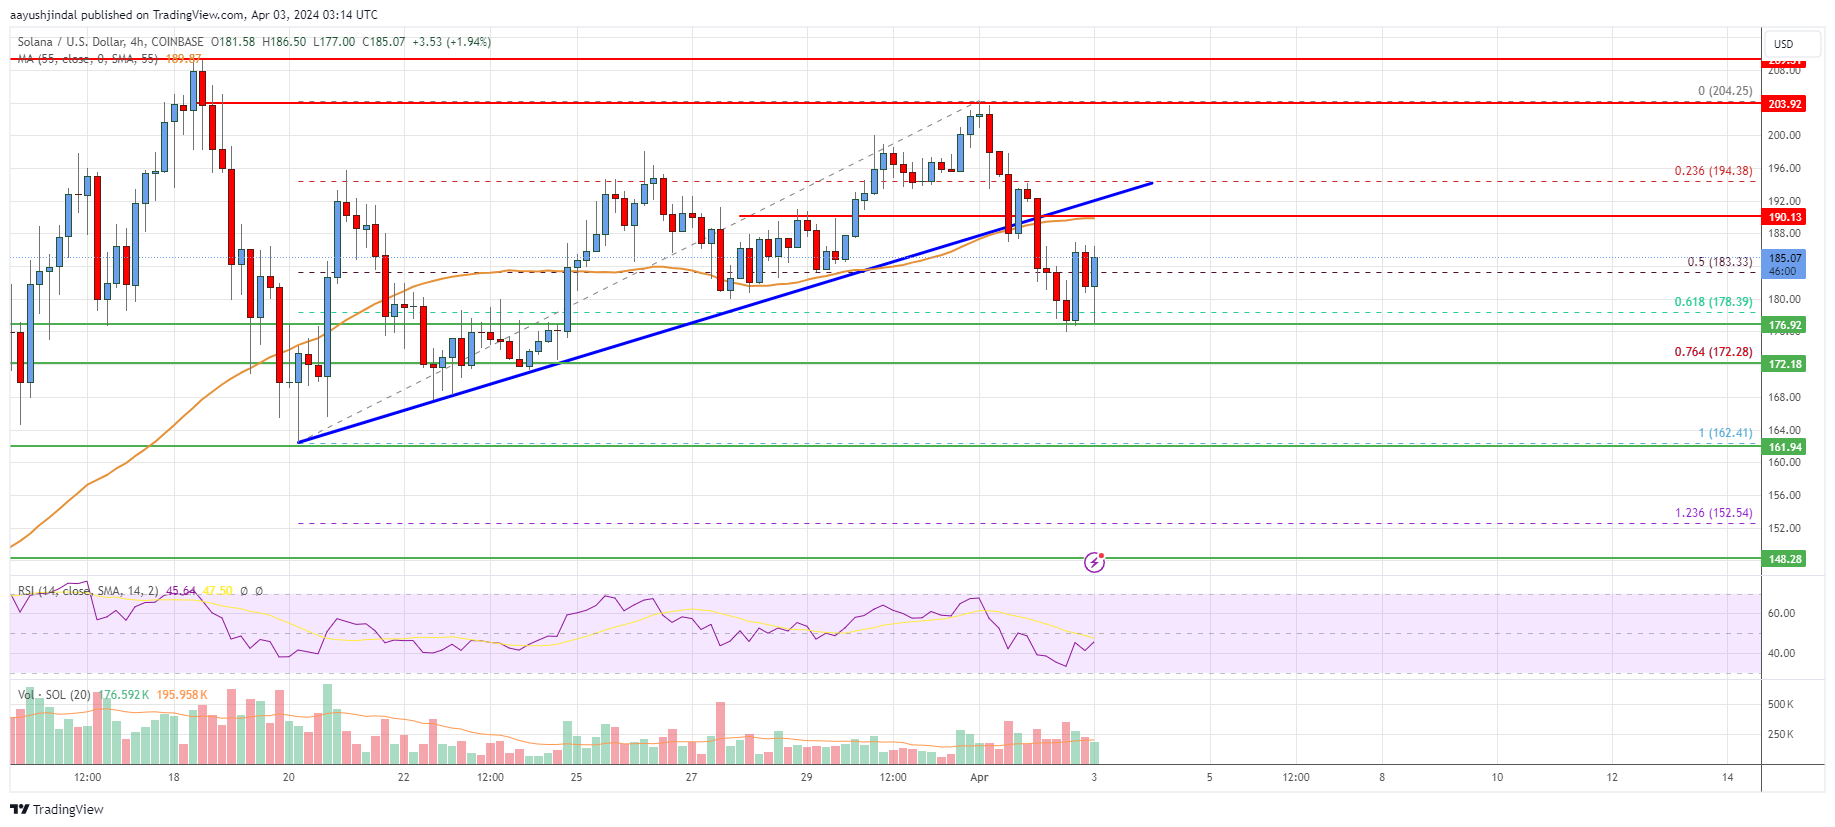 Solana (SOL) Price Analysis: Dips Attractive Near $170